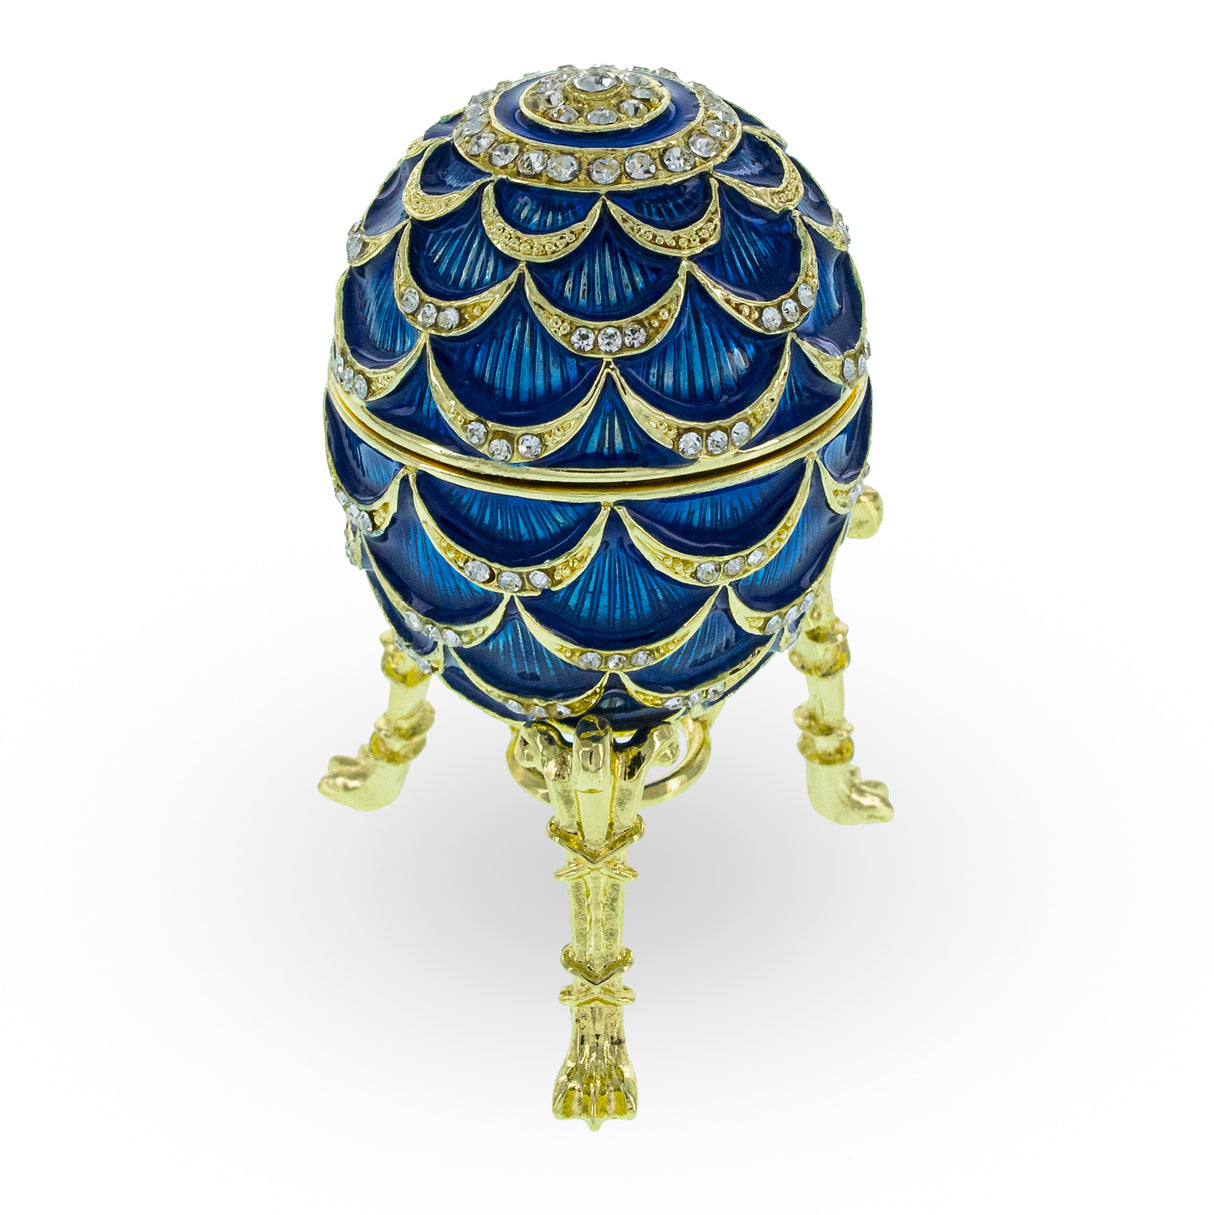 Blue Enamel Pinecone Royal Inspired Imperial Easter Egg with Clock in Blue color, Oval shape